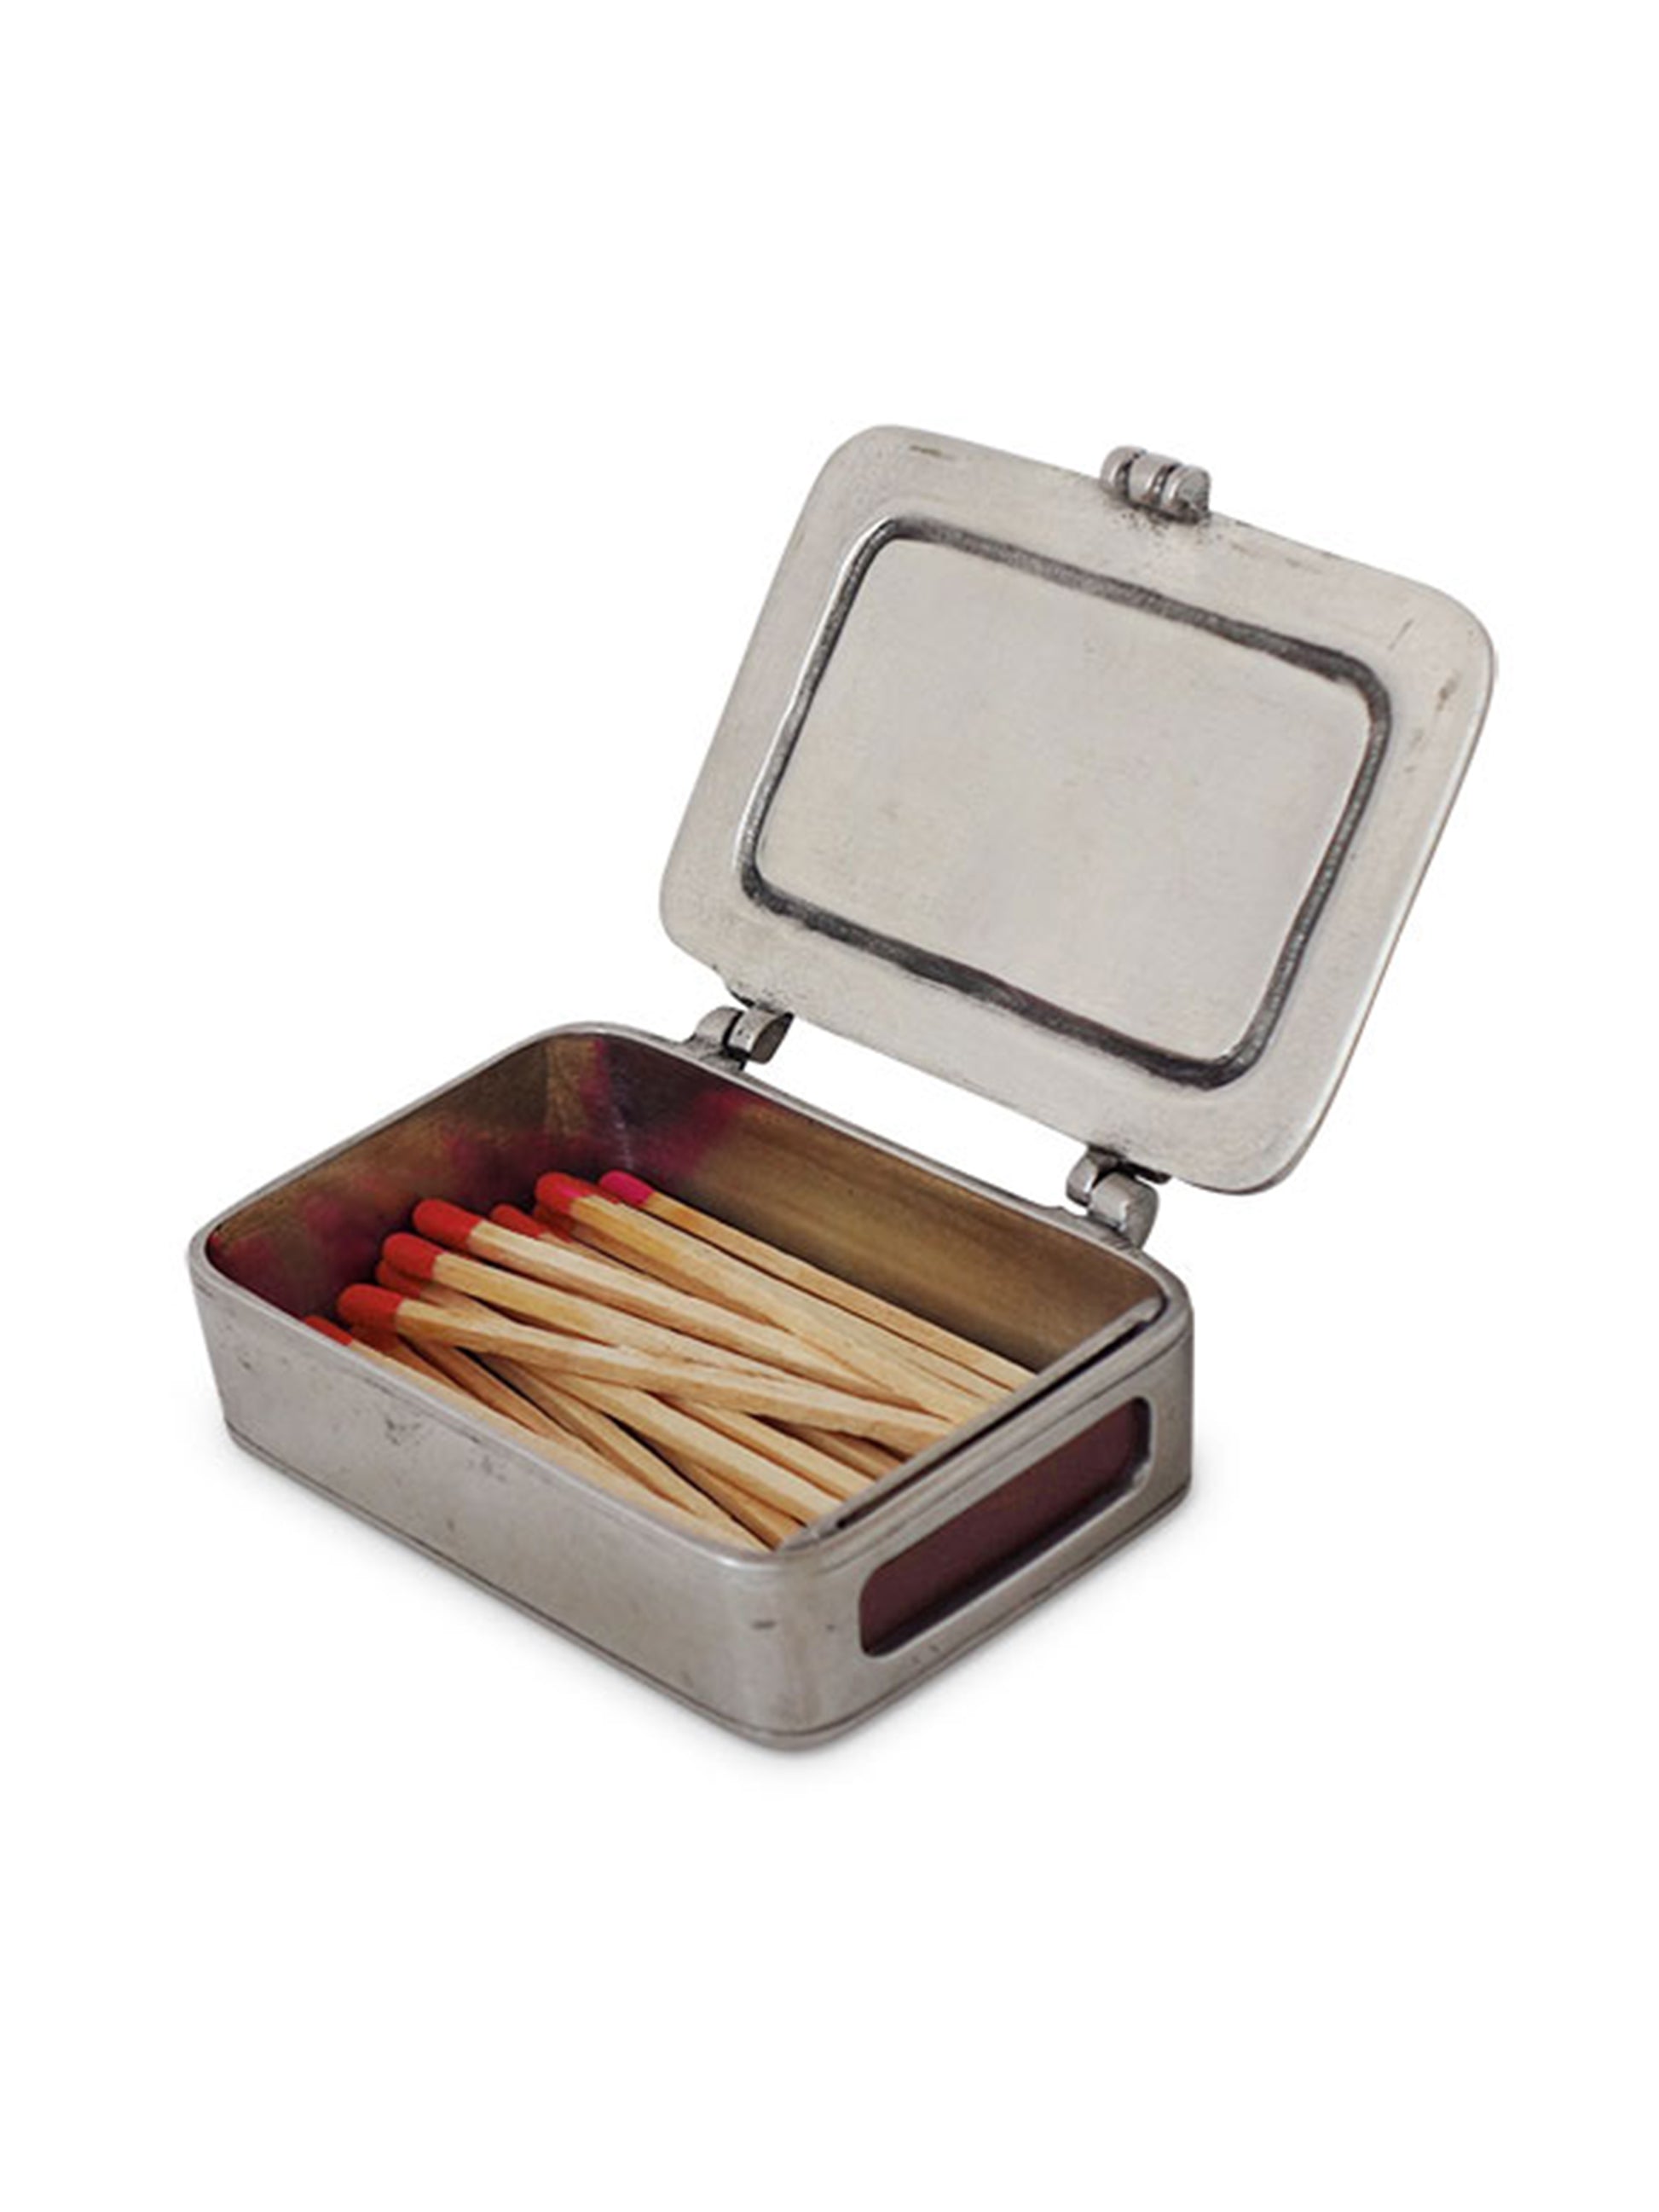 MATCH Pewter Matchbox with Striker & Matches Weston Table